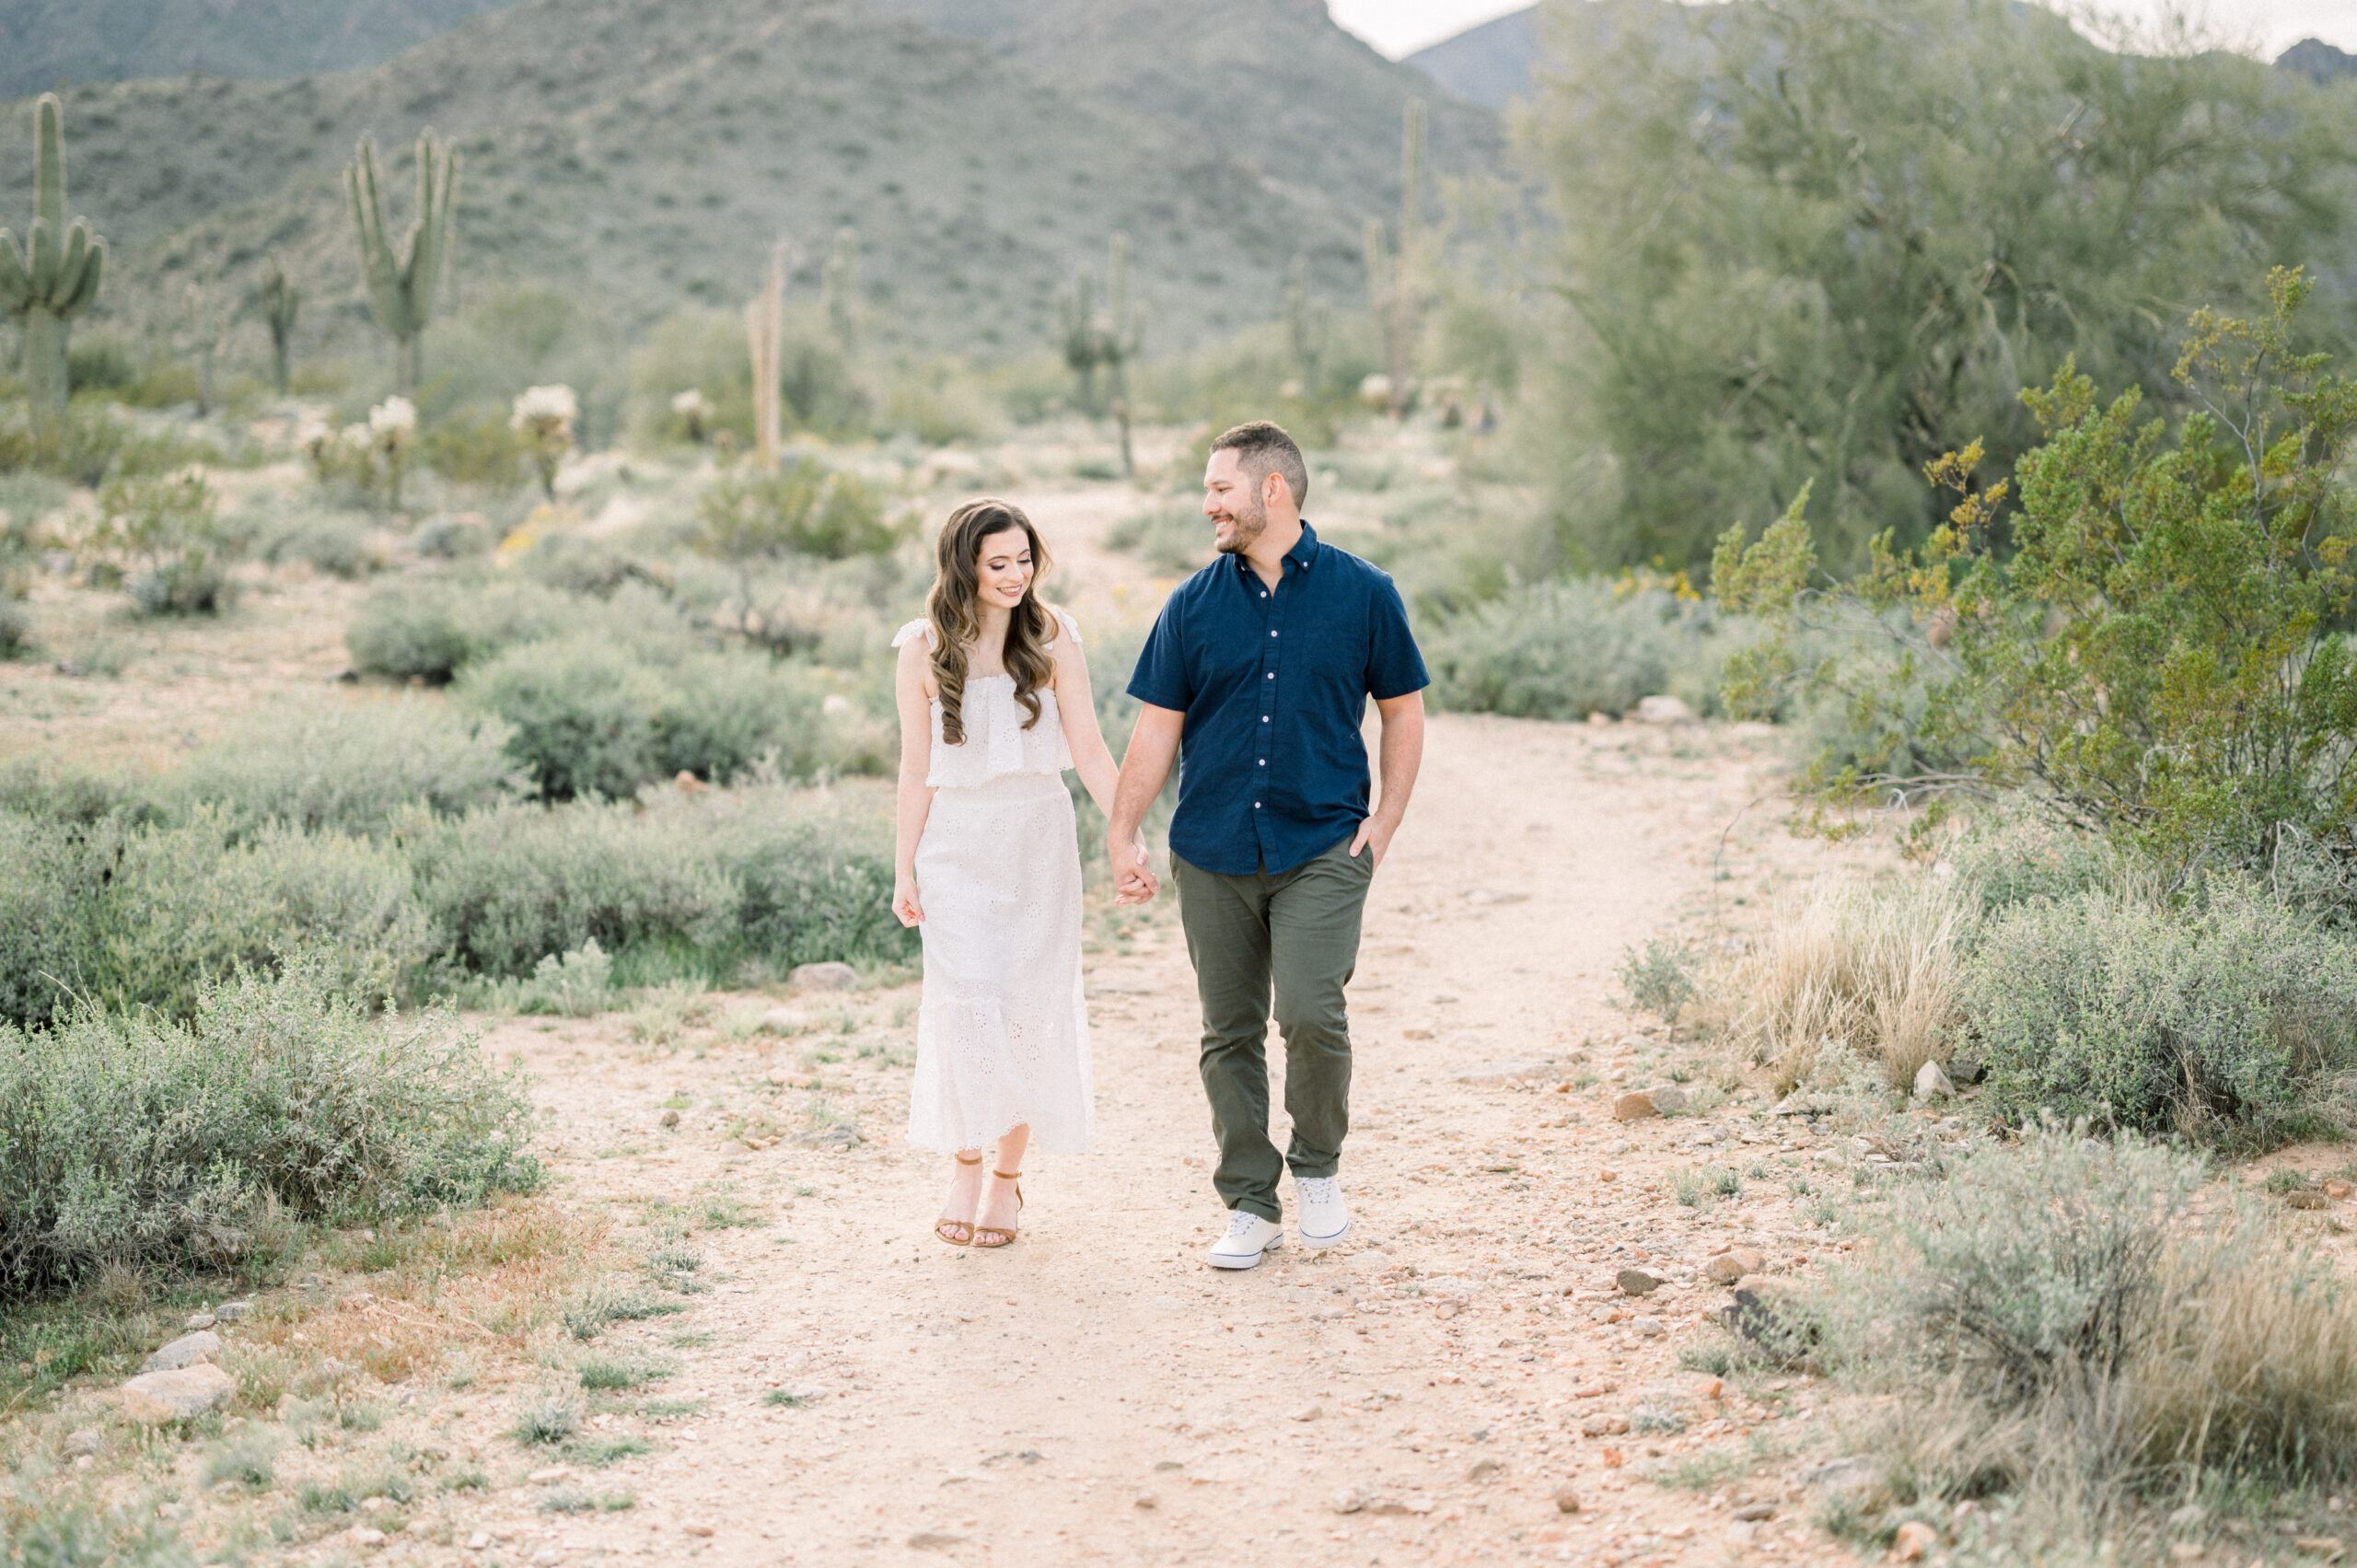 Marlene and Kevins cloudy Phoenix desert engagement session was so beautiful. The sun peaked out for a few minutes, the clouds stayed and it was beautiful!